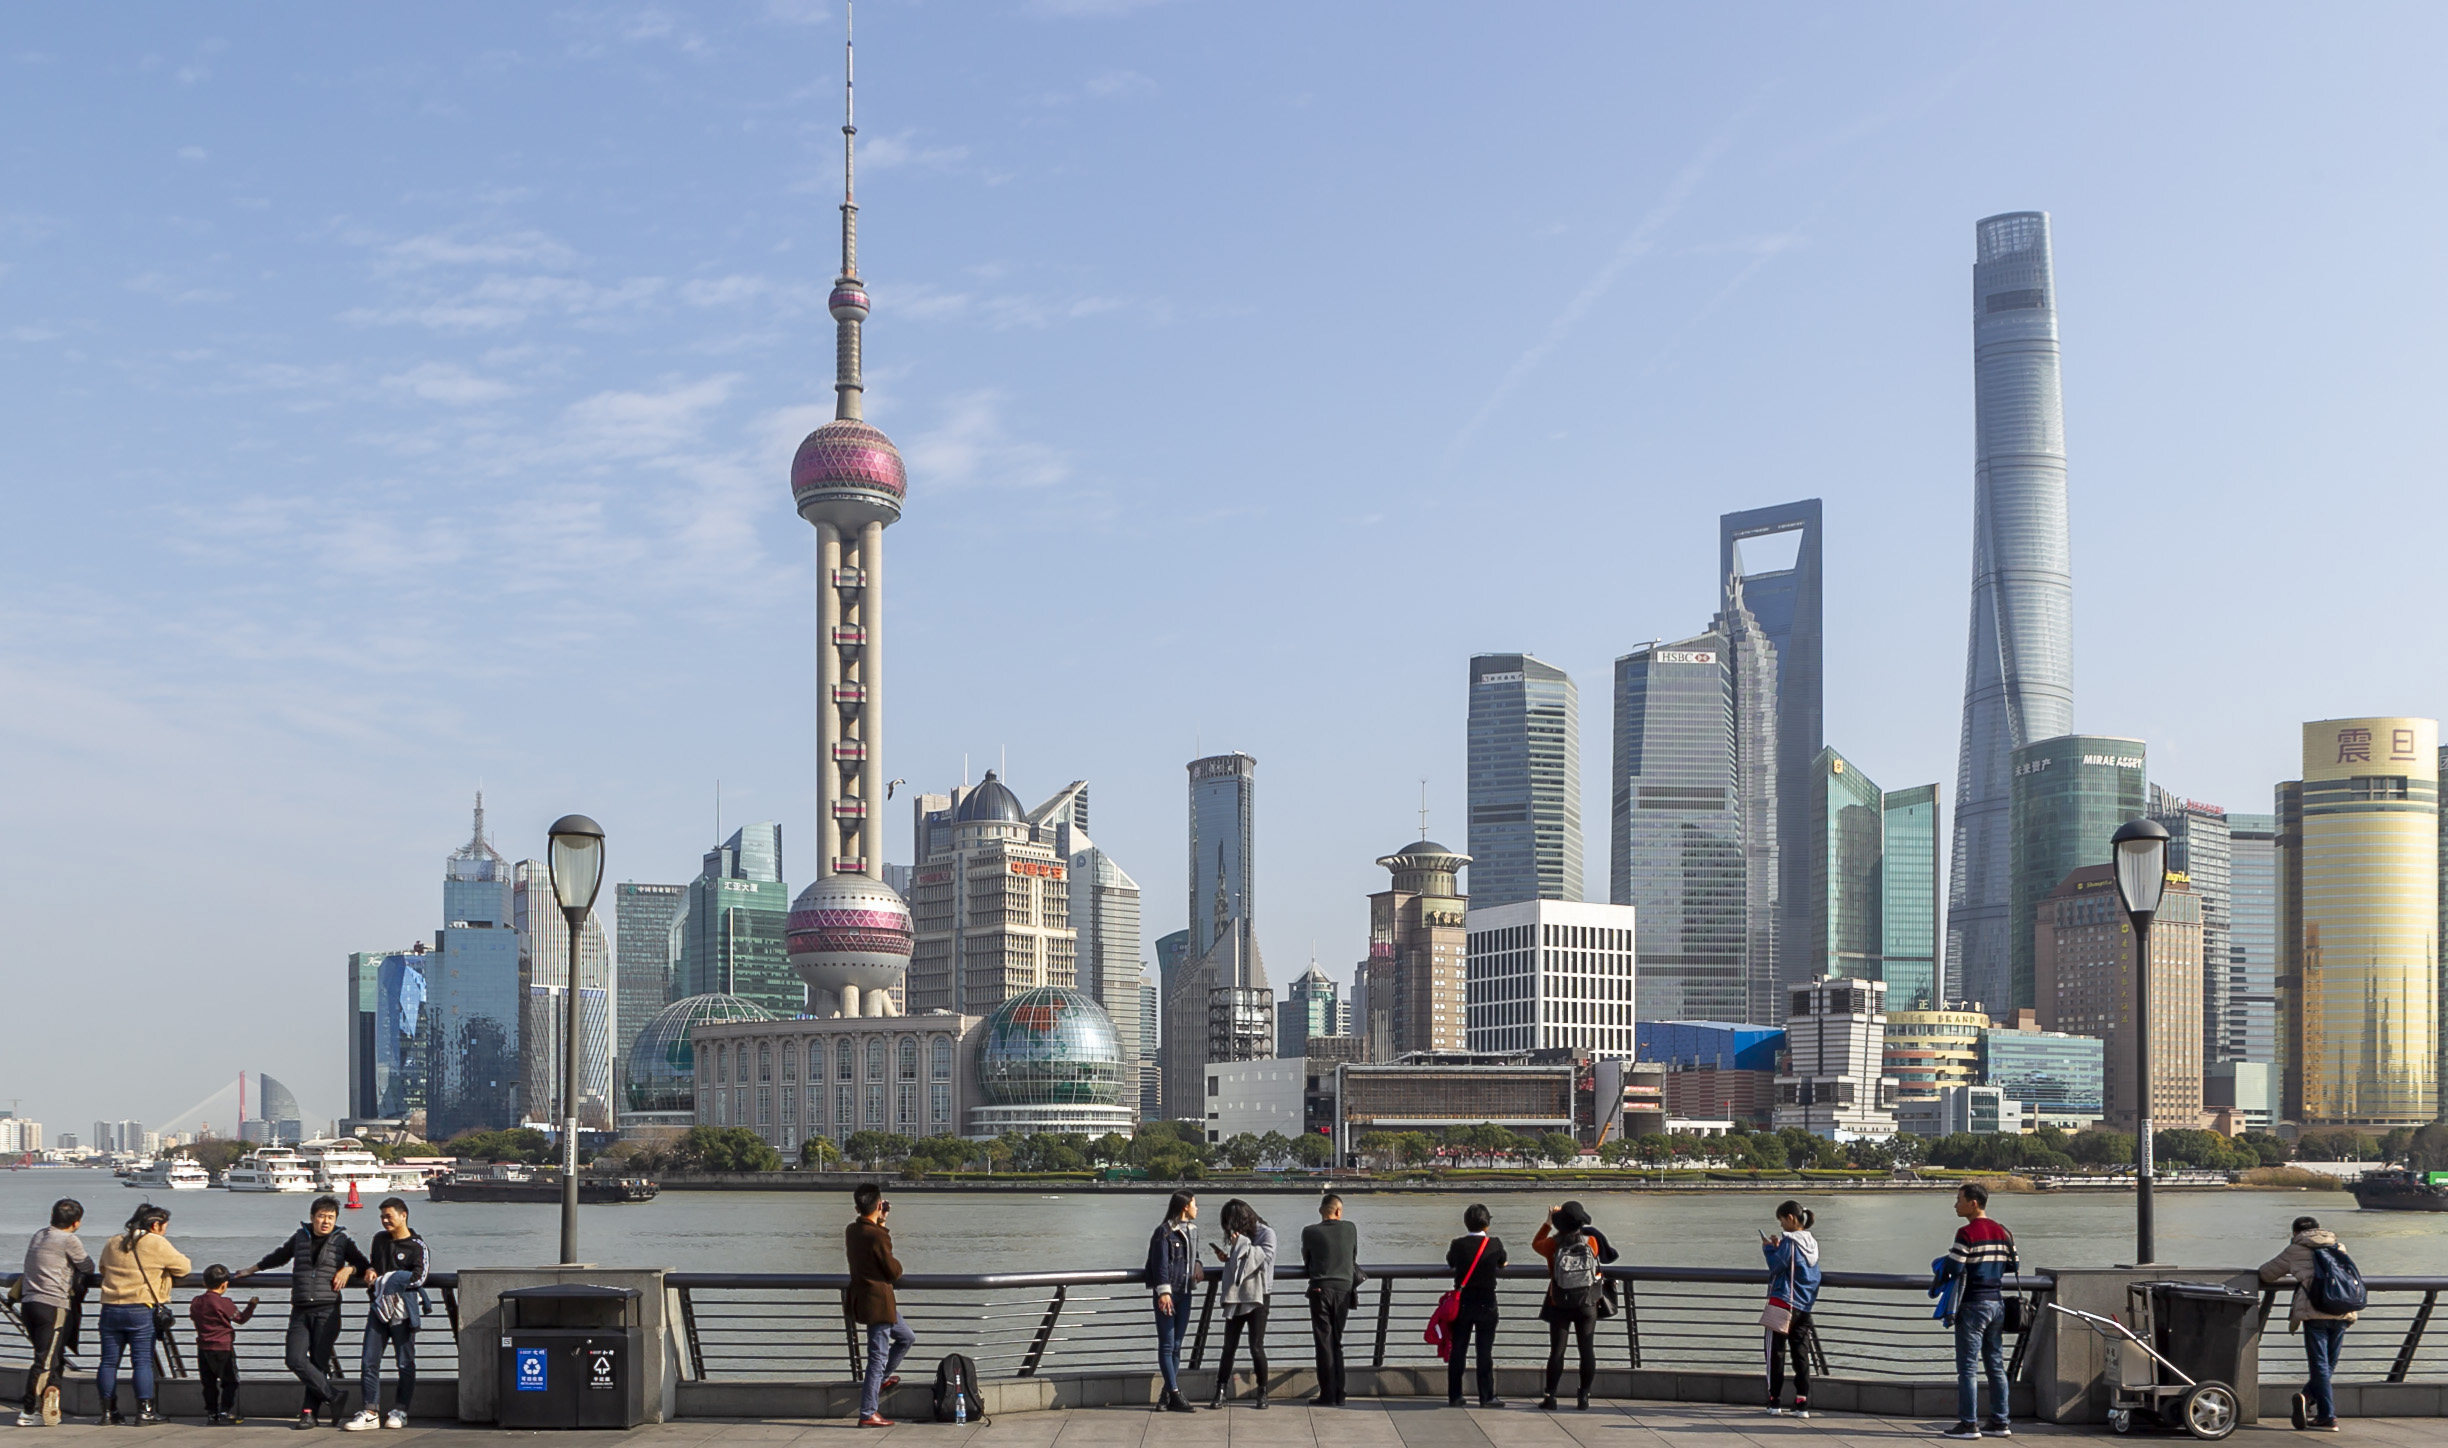 (200522) -- BEIJING, May 22, 2020 (Xinhua) -- Tourists admire the skyline view of Lujiazui area at the Bund in Shanghai, east China, Jan. 6, 2020. China’s economy posted negative growth in the first quarter of this year, but it was “a price worth paying” to contain COVID-19 as life is invaluable, according to a government work report submitted Friday to the national legislature for deliberation. (Xinhua/Wang Xiang)